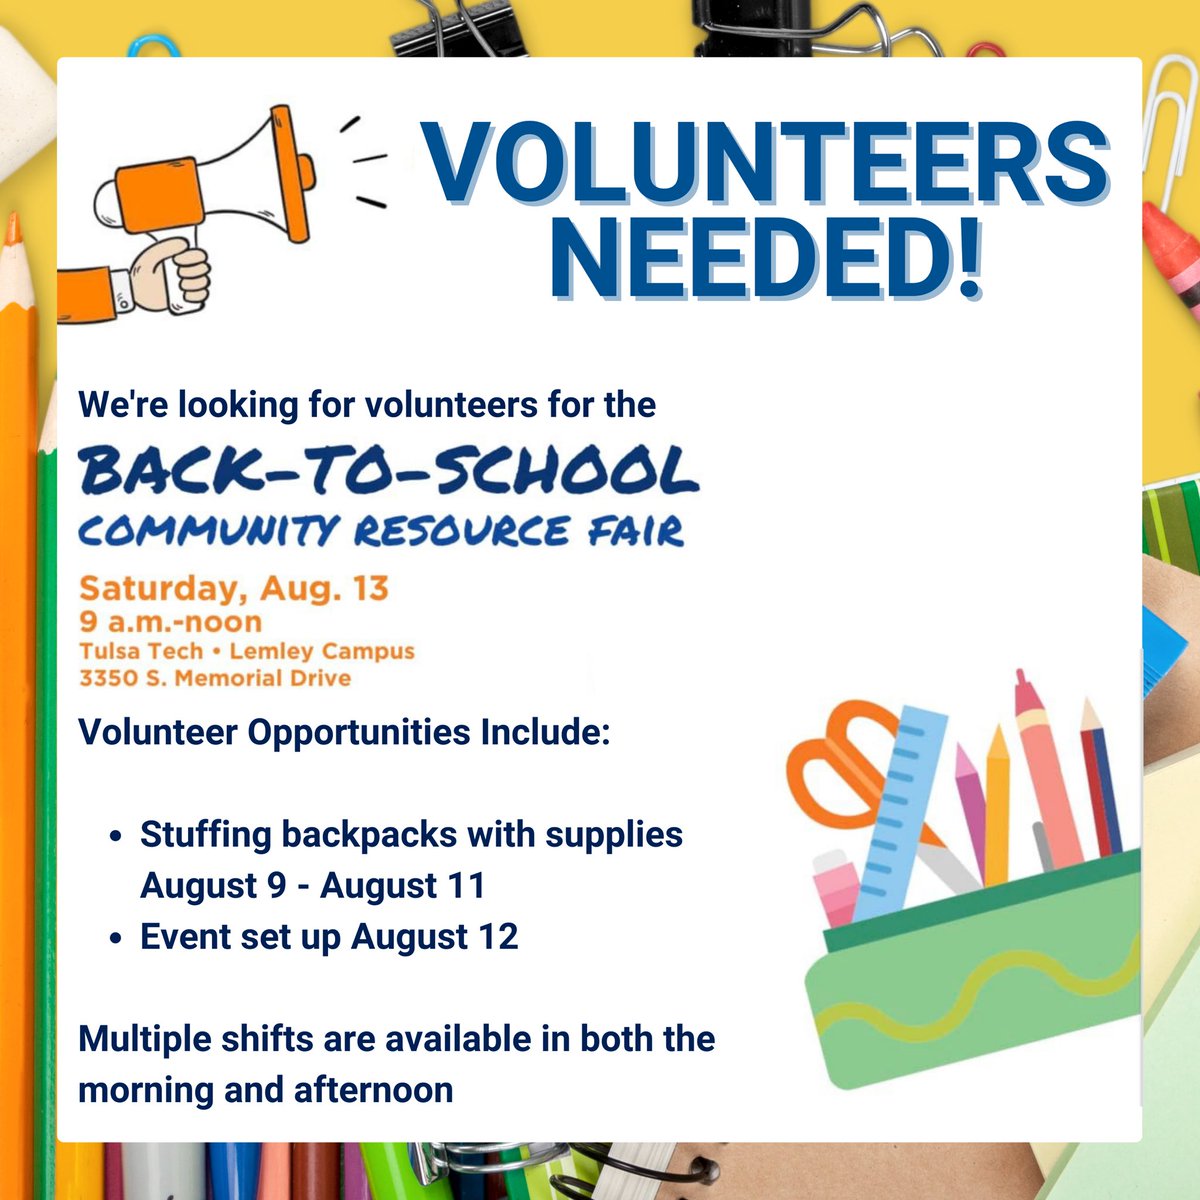 Calling all volunteers! We need some help with our upcoming Back to School event. Multiple opportunities are available August 9 - August 12 in two or three hour increments. View more details and sign up at volunteer.tauw.org/back-to-school! #LiveUnited #Volunteer